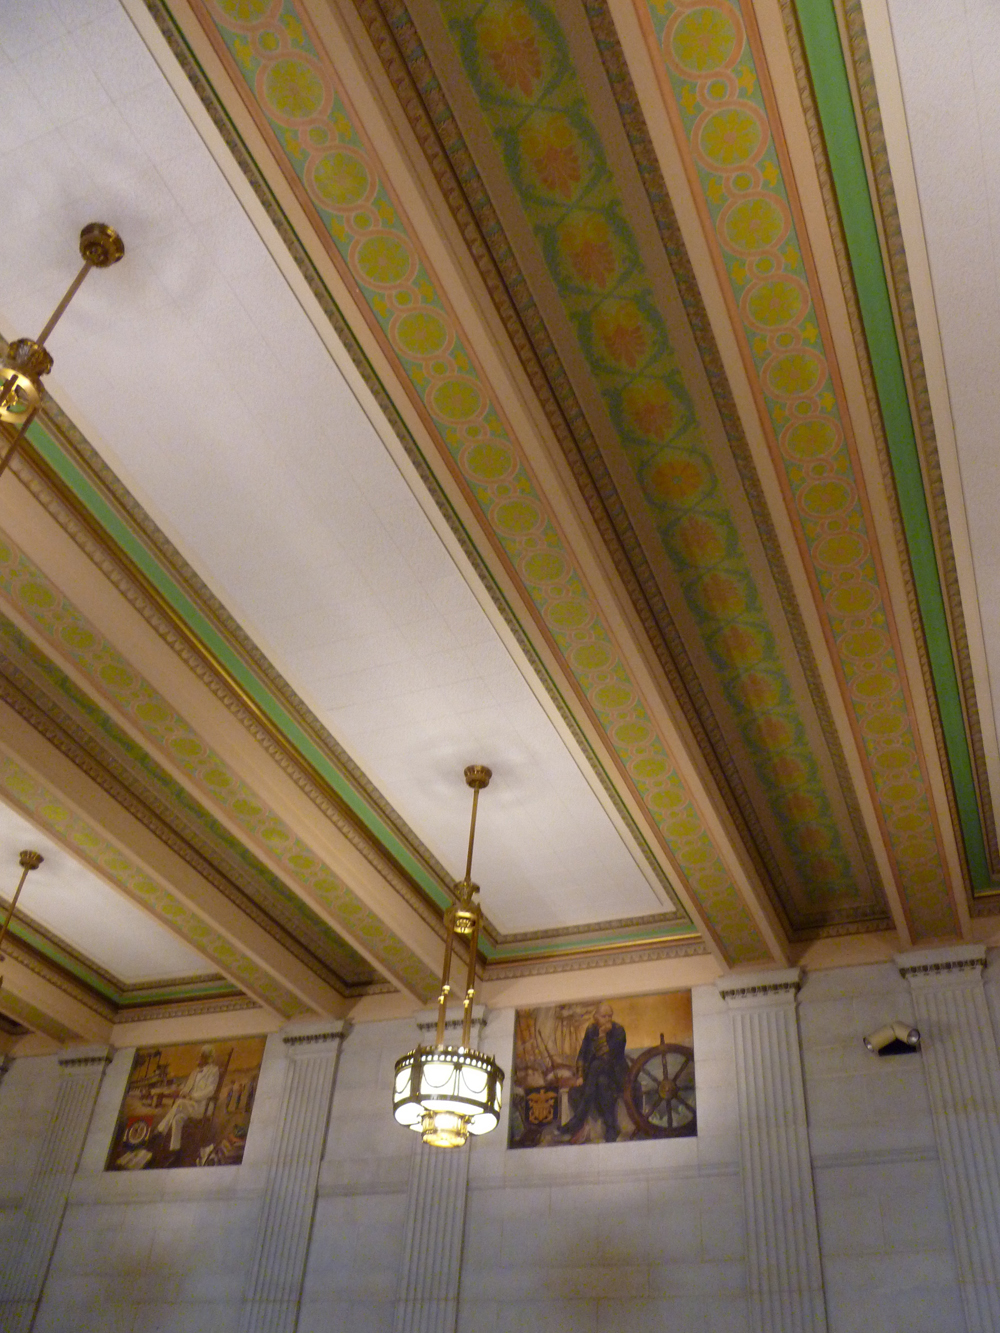 The interior spaces of Family Court include ornate ceiling details, woodwork and light fixtures.